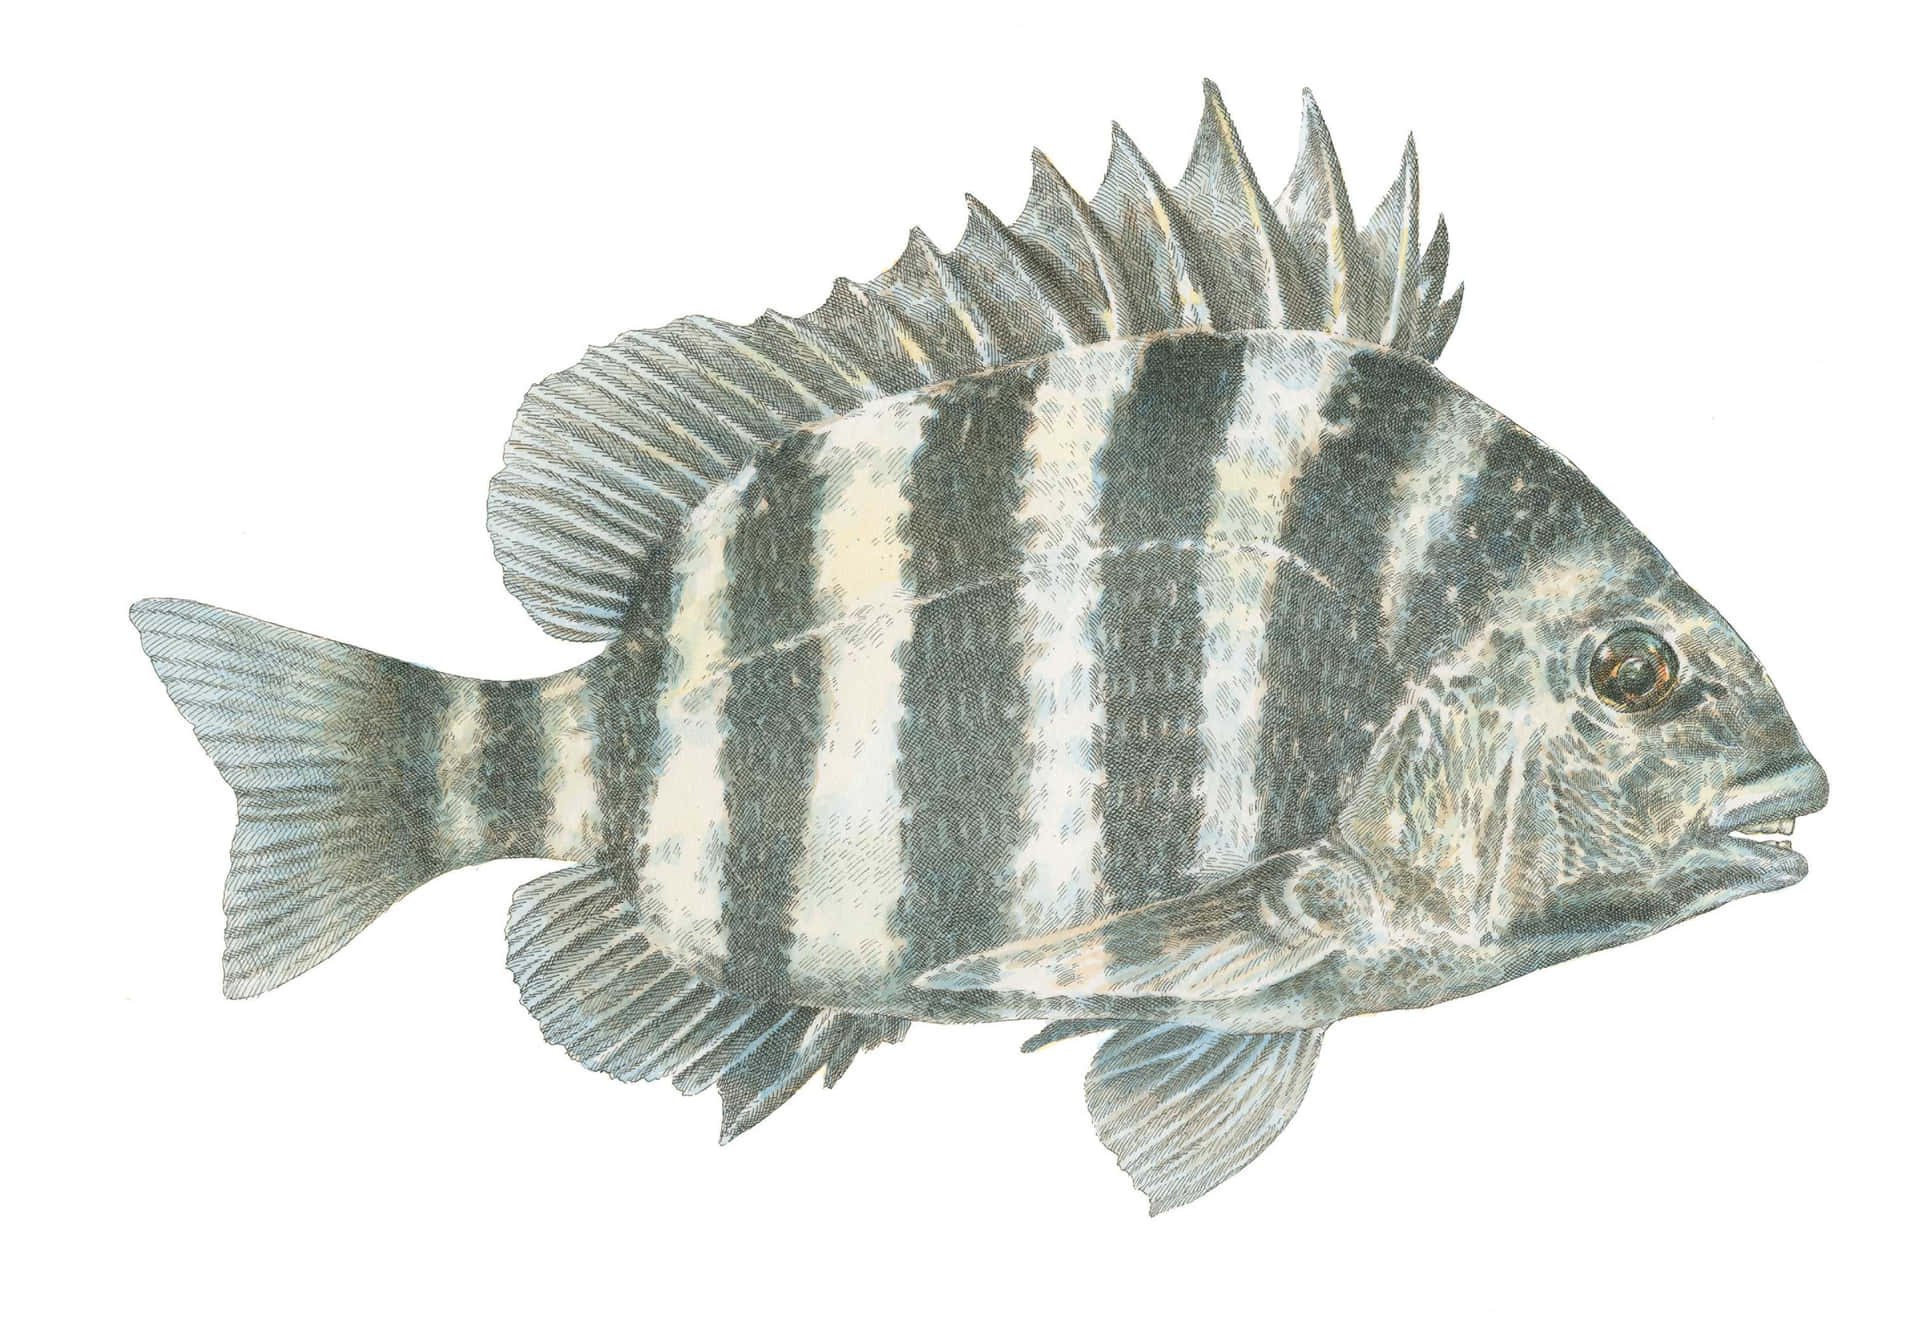 A Black And White Fish With Stripes